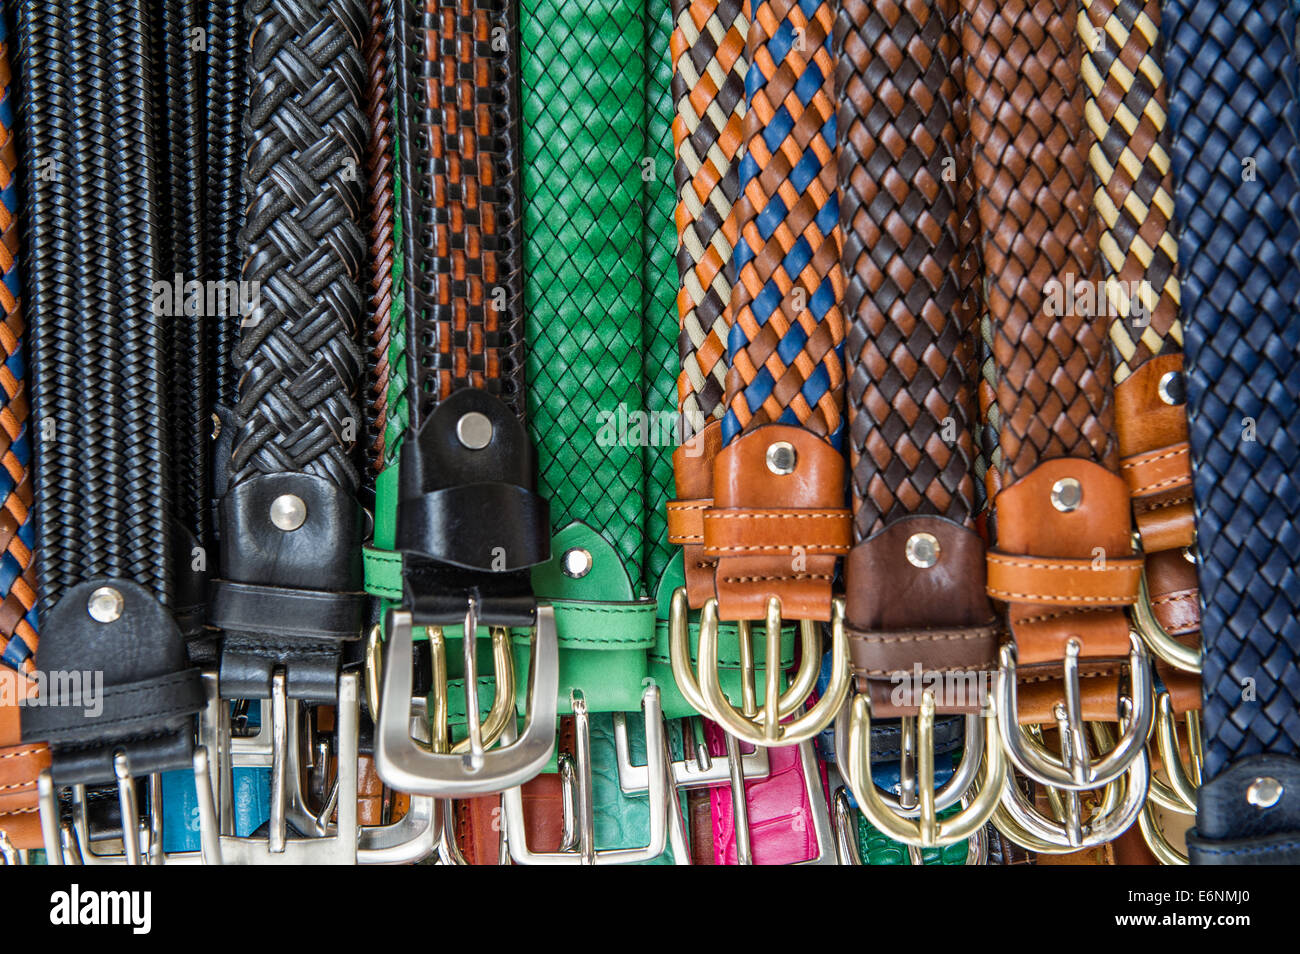 Colorful Leather Belts Trousers Stock Photo 2295976037 | Shutterstock